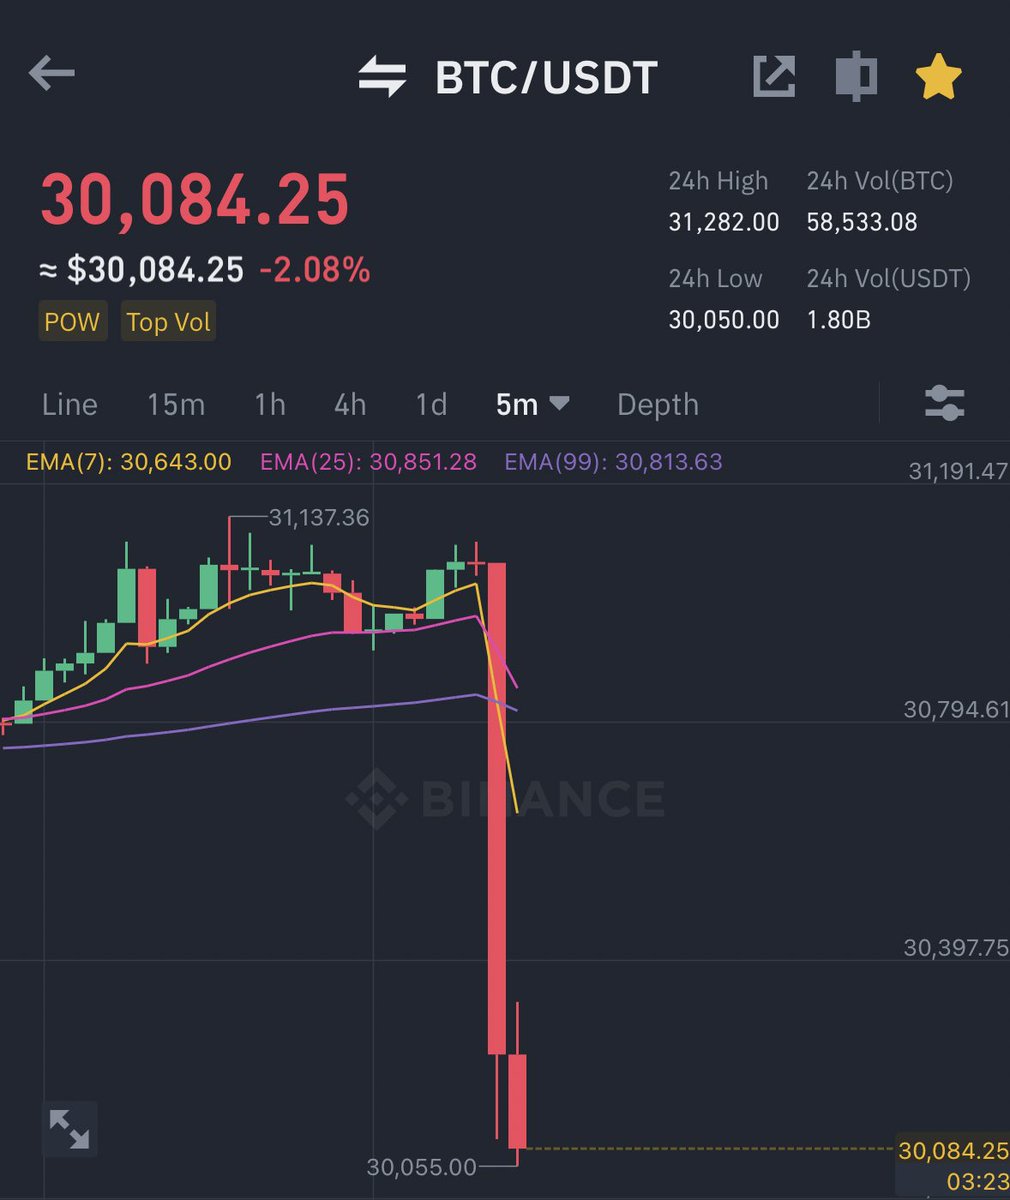 CZ What Is This Image.
End This.
End the Long and Shorts Incident with Gambling at #Binance.
Crypto For Investment Purposes Only.
This Gambling Incident Has Ruined People.
@cz_binance @saylor 
#bitcoin #btc #USDT 
#sort #long #Stop 👍 Yes